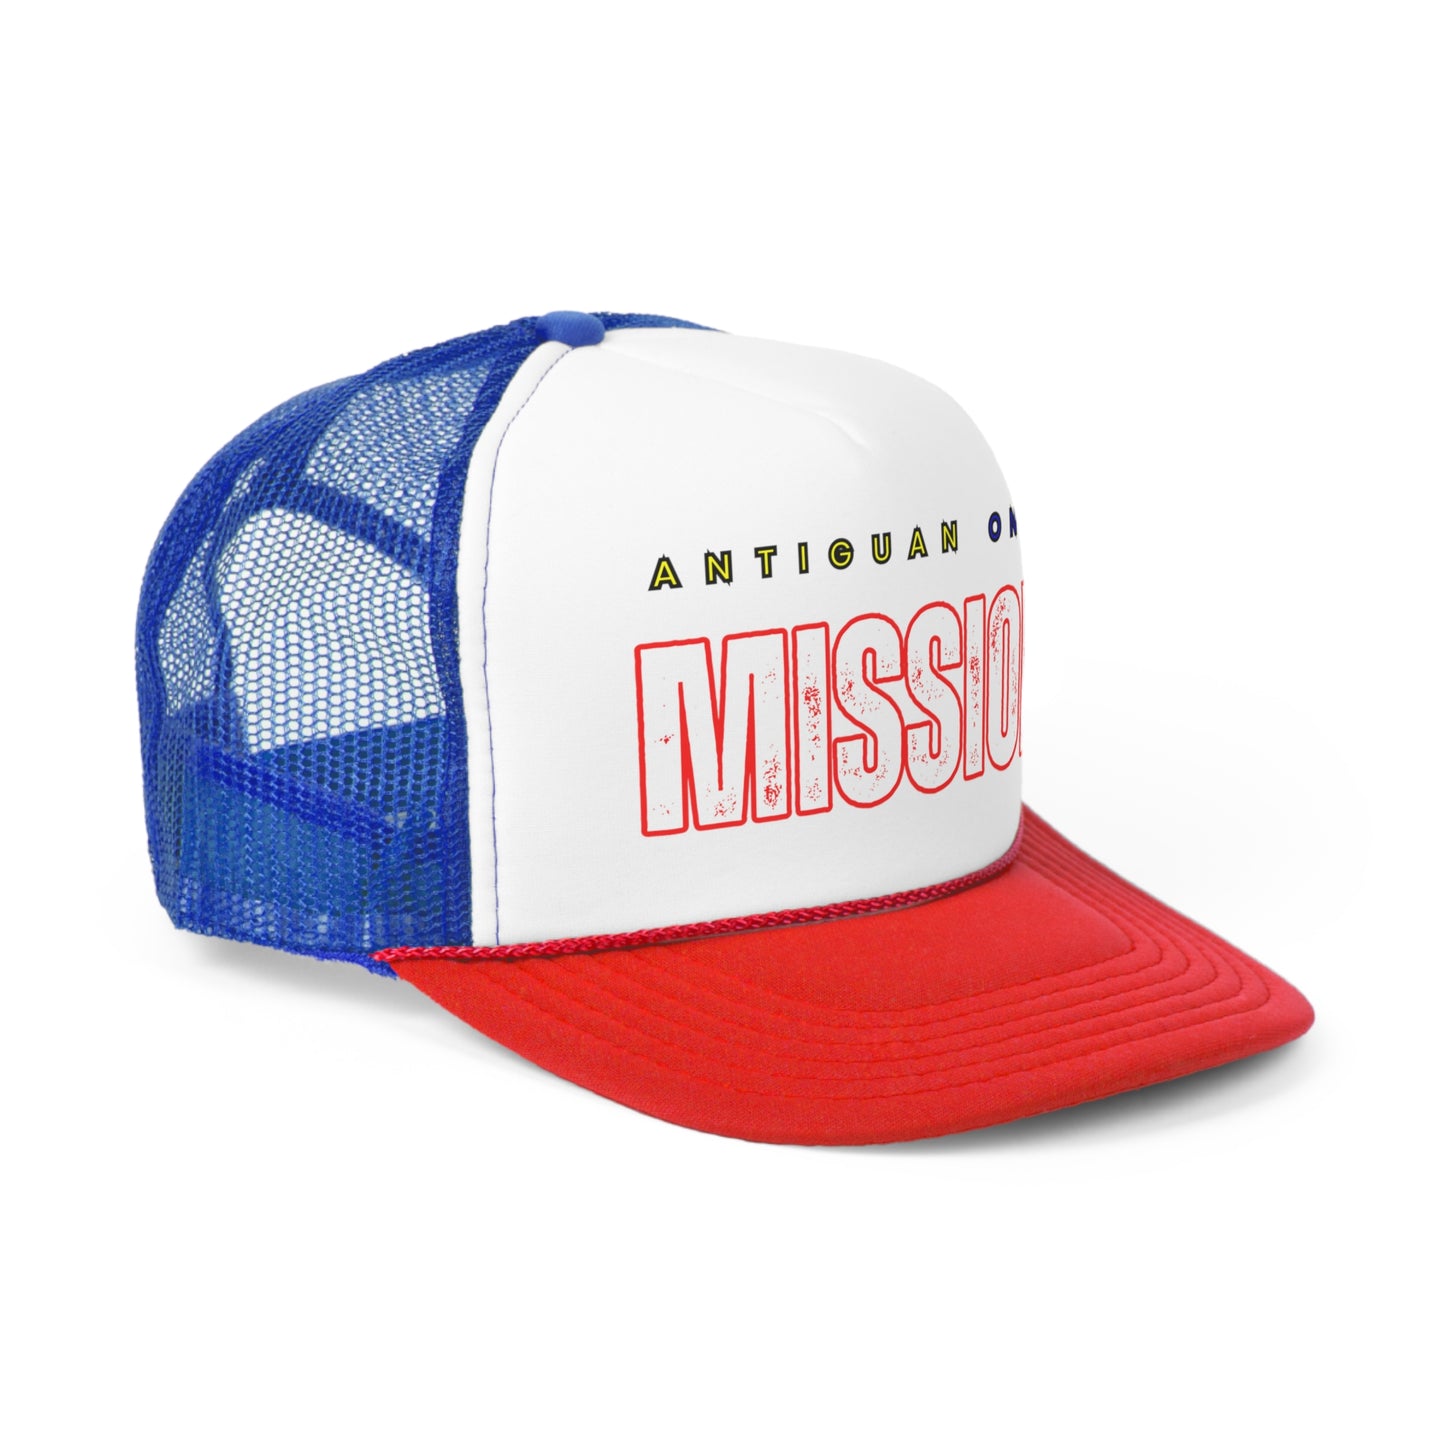 Antiguan on a Mission Trucker Caps